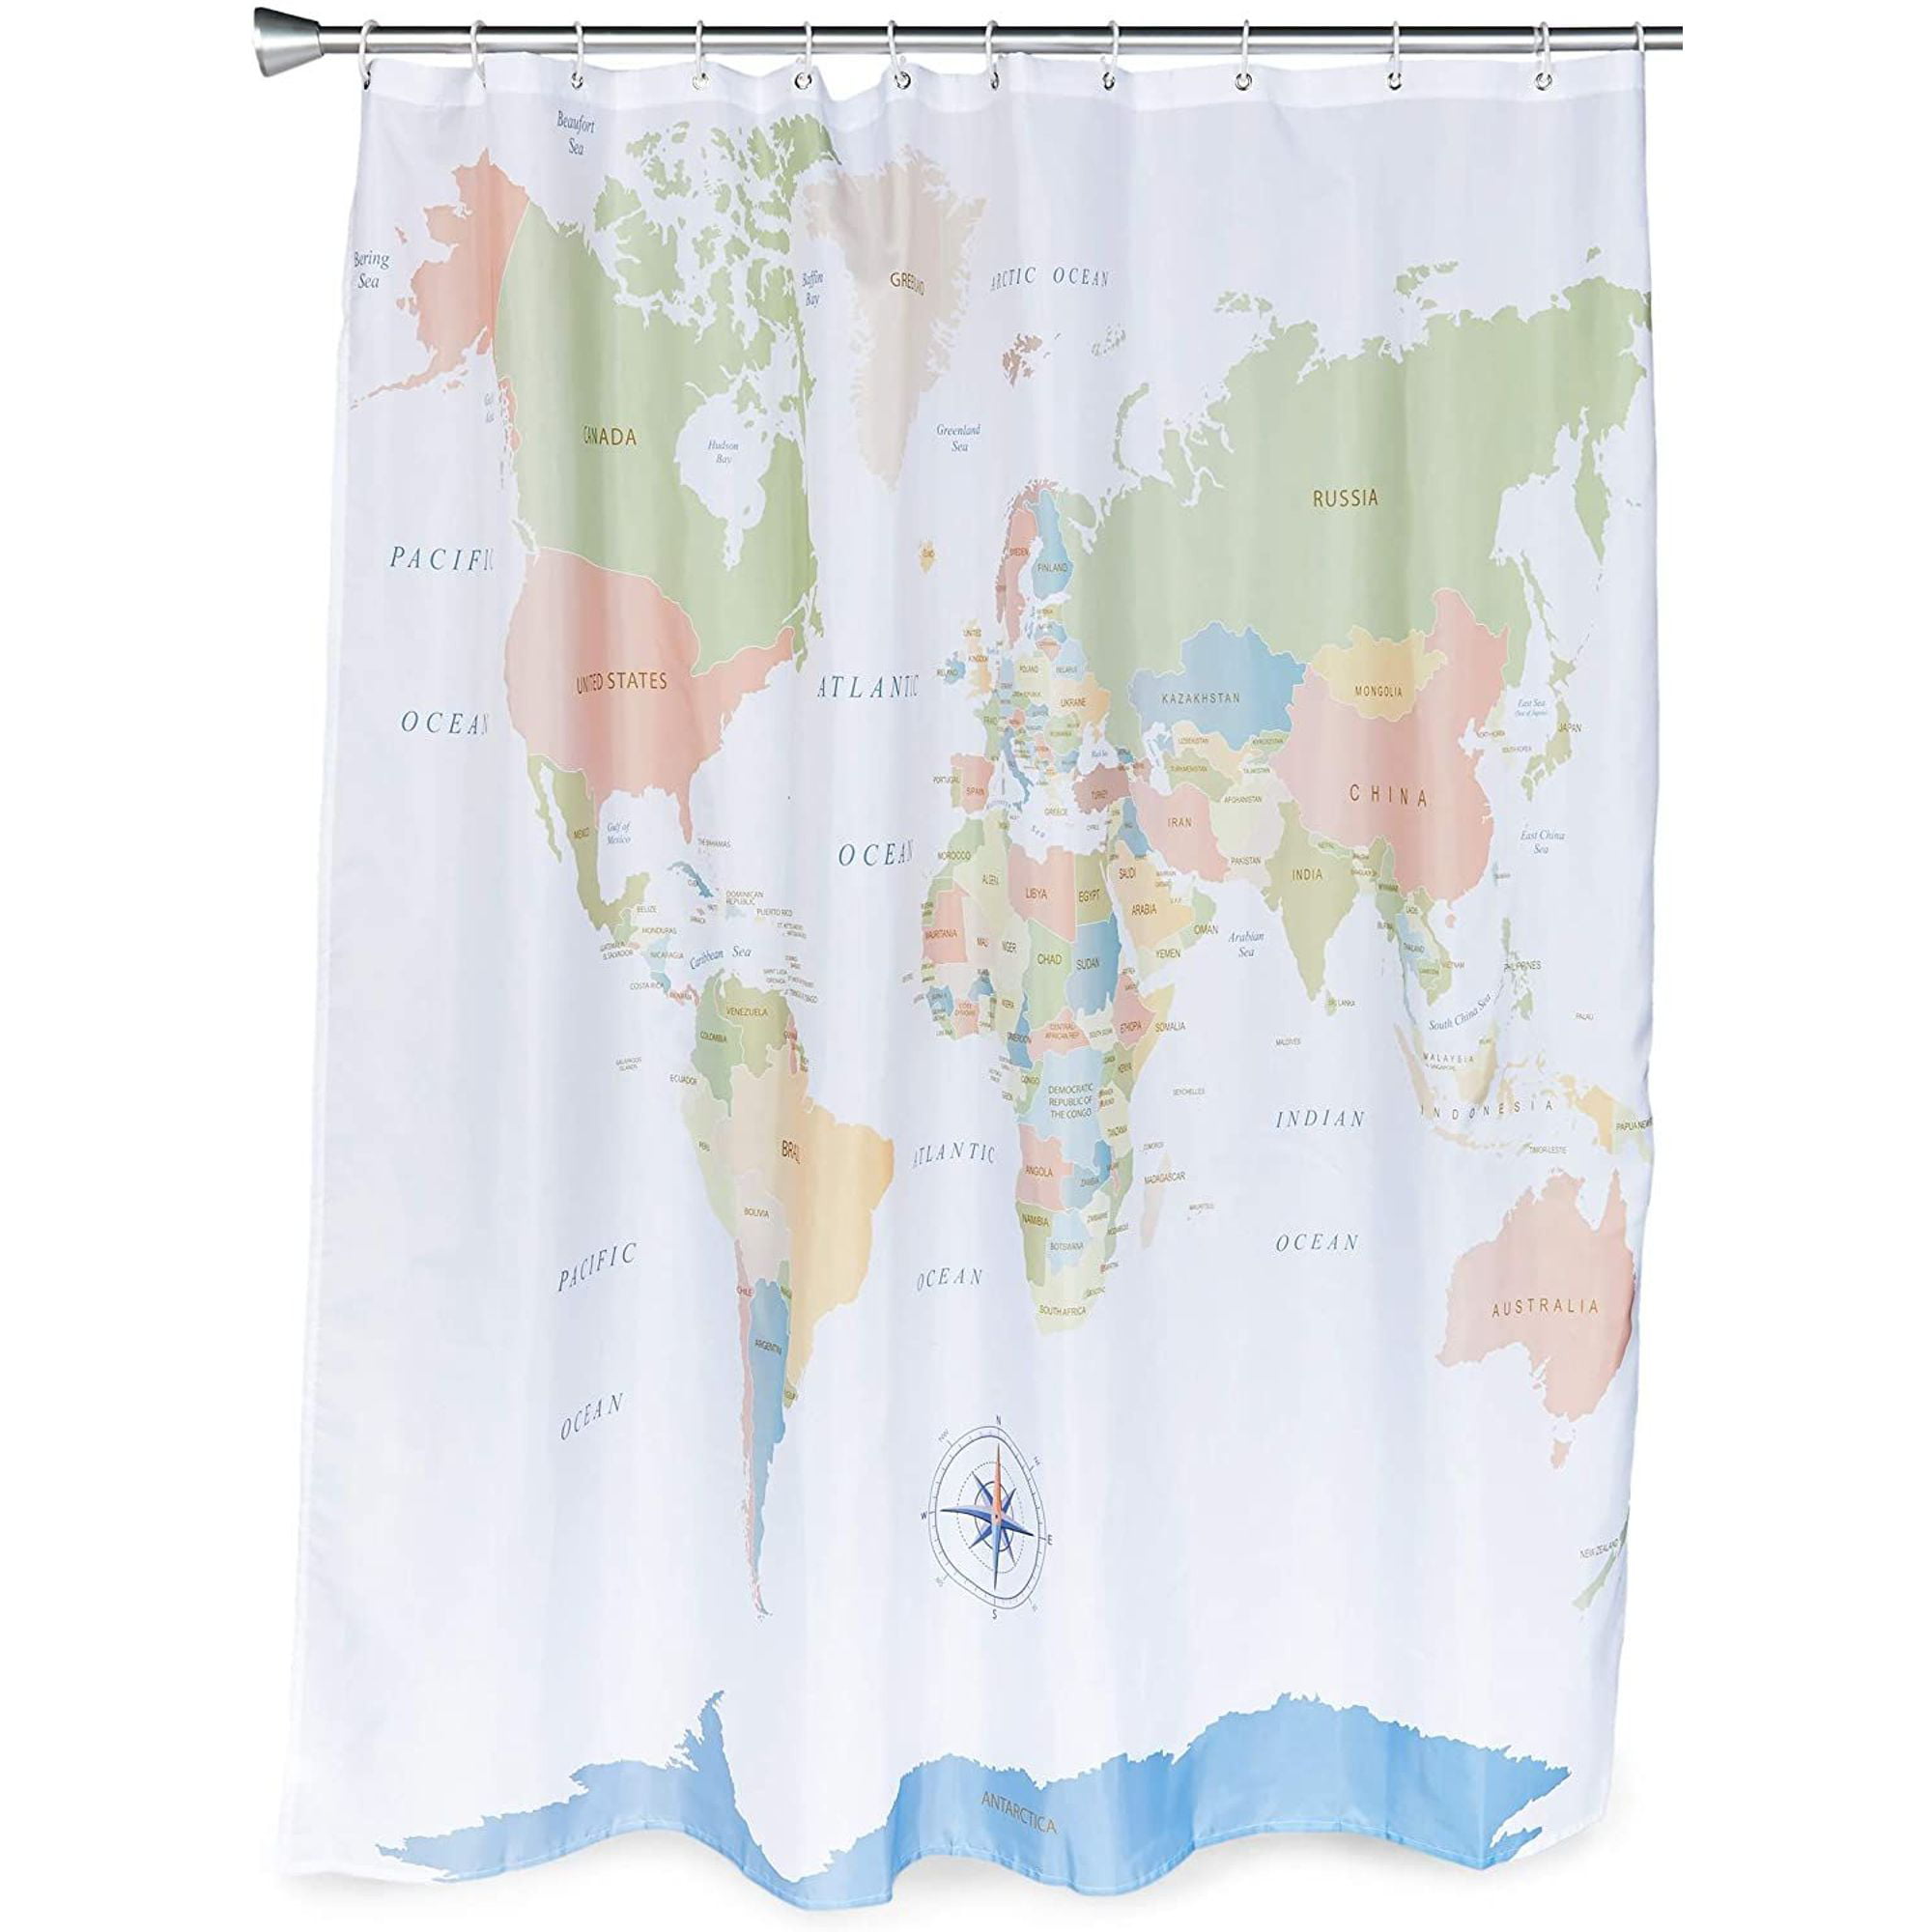 World Map Fabric SHOWER CURTAIN 70x70 Vintage Look Style Countries Globe